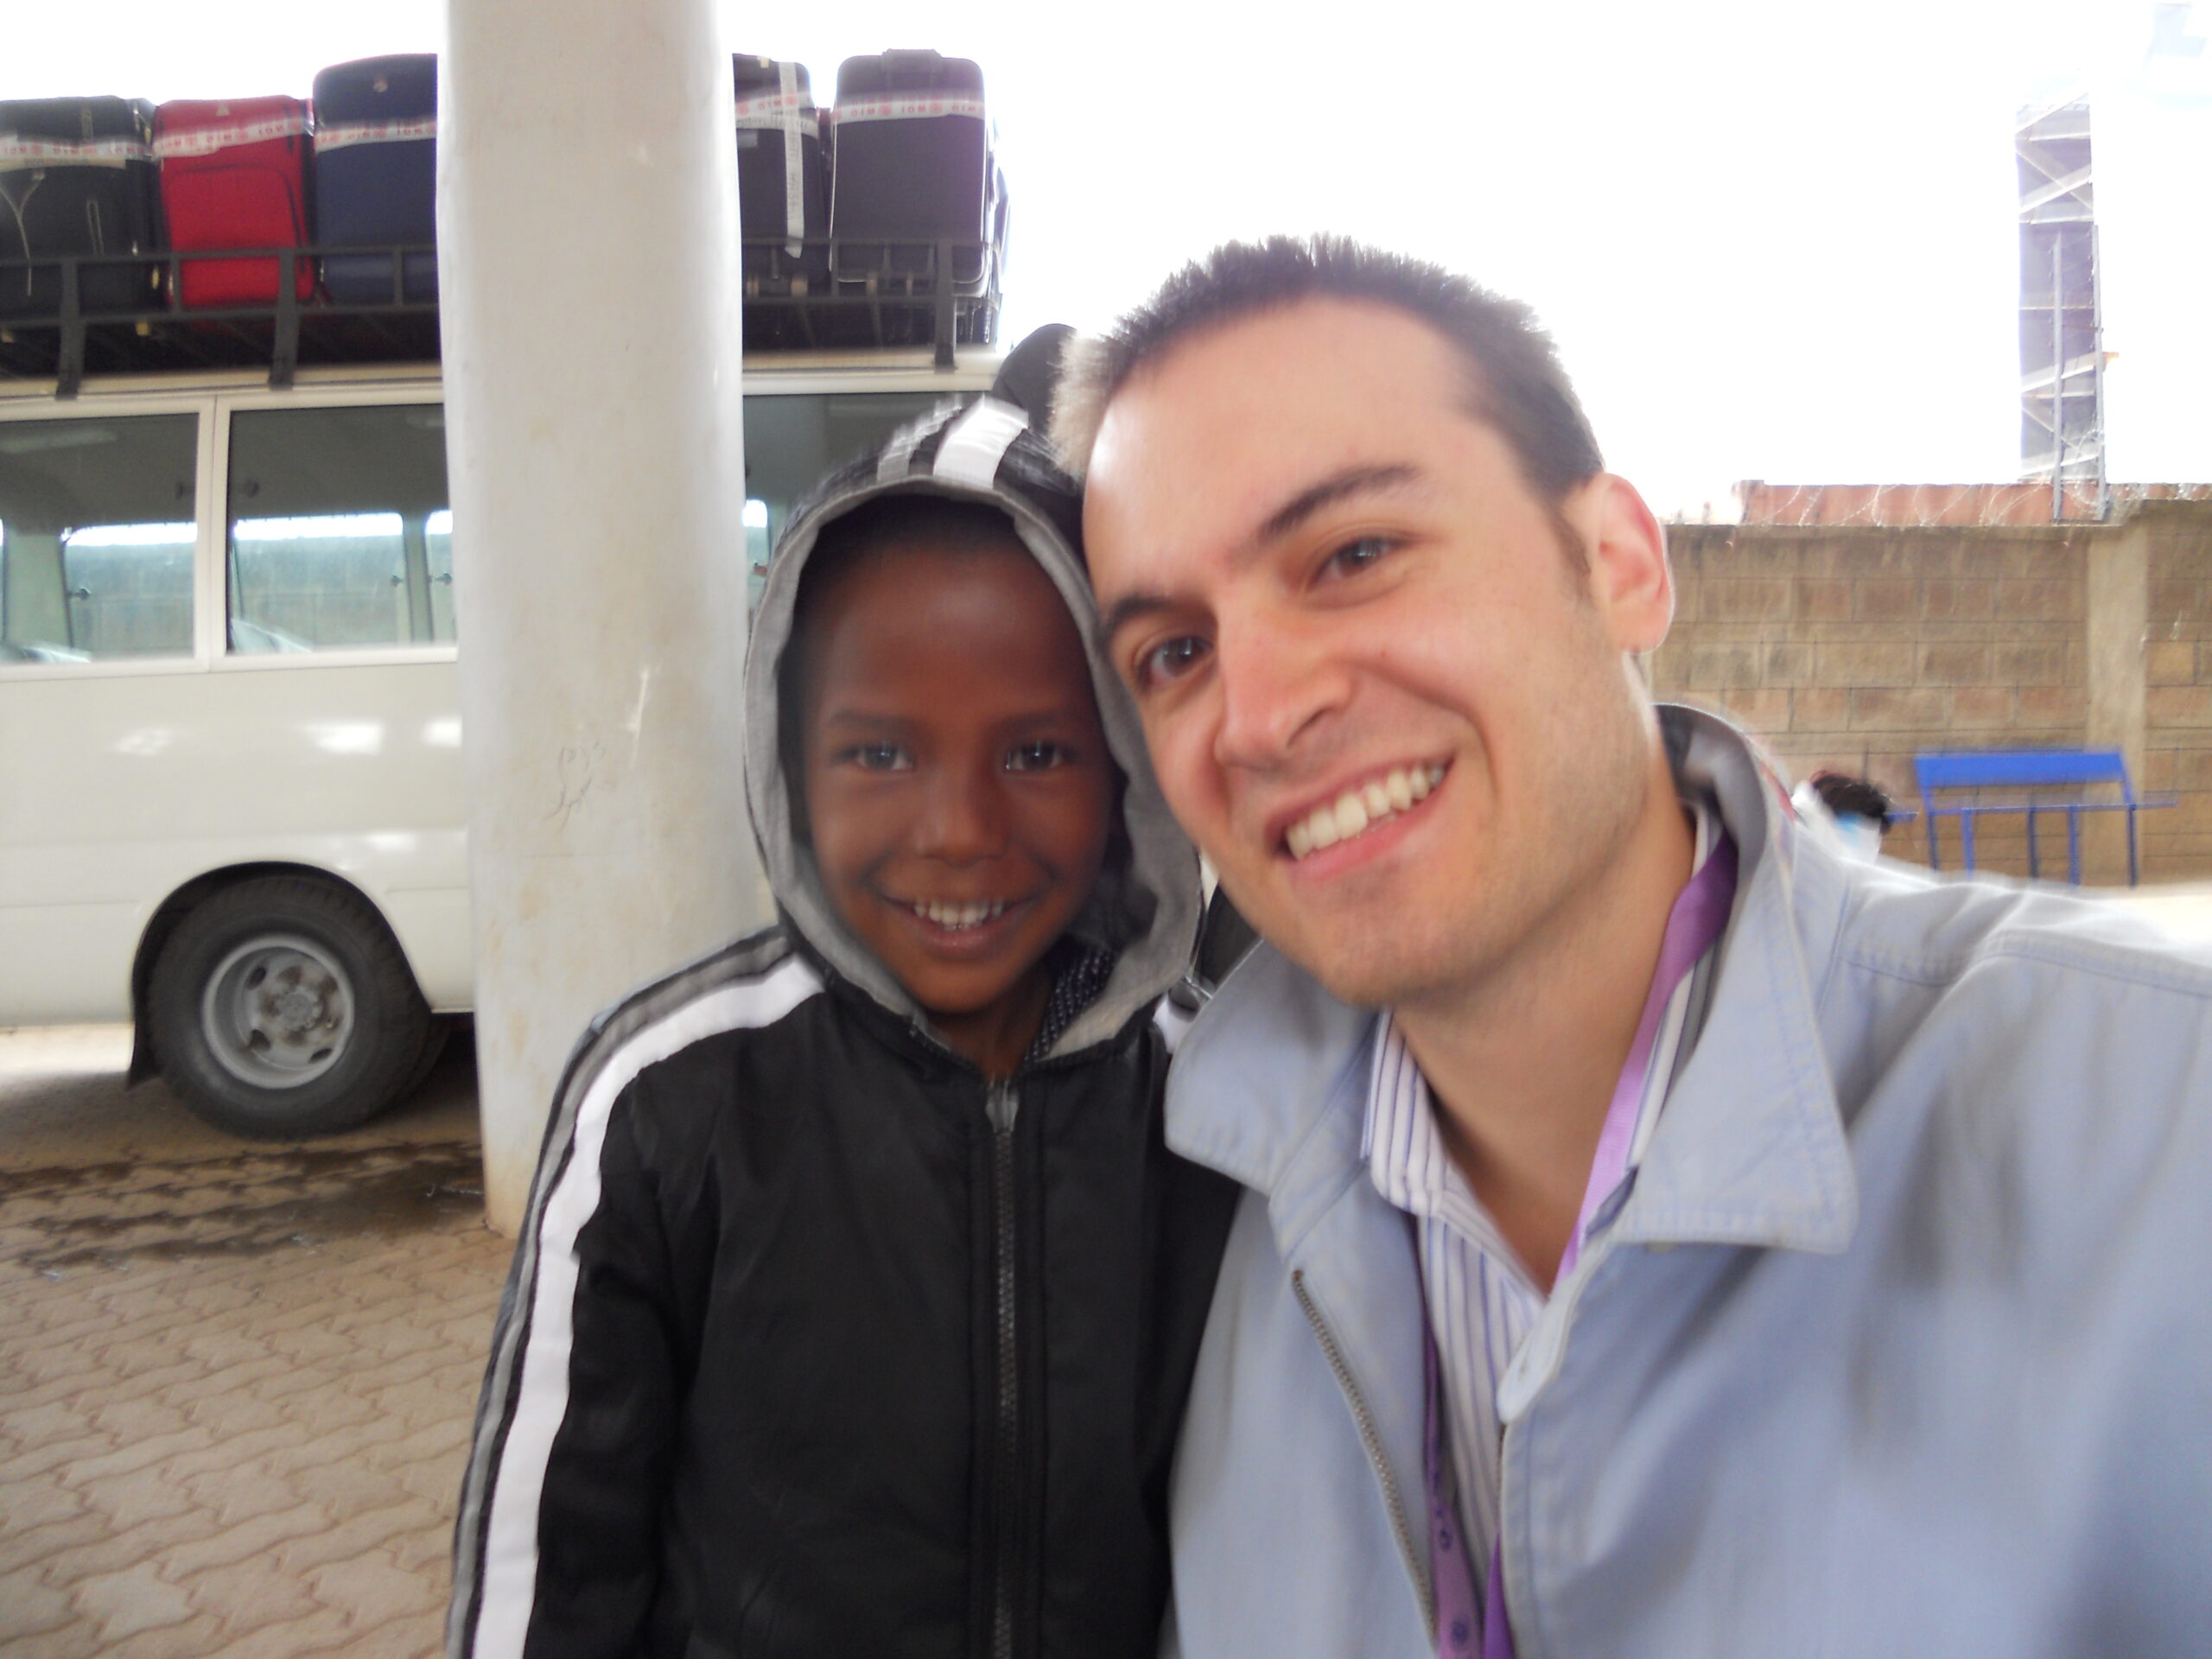 Brett Stark poses with a Kenyan child in front of a white column